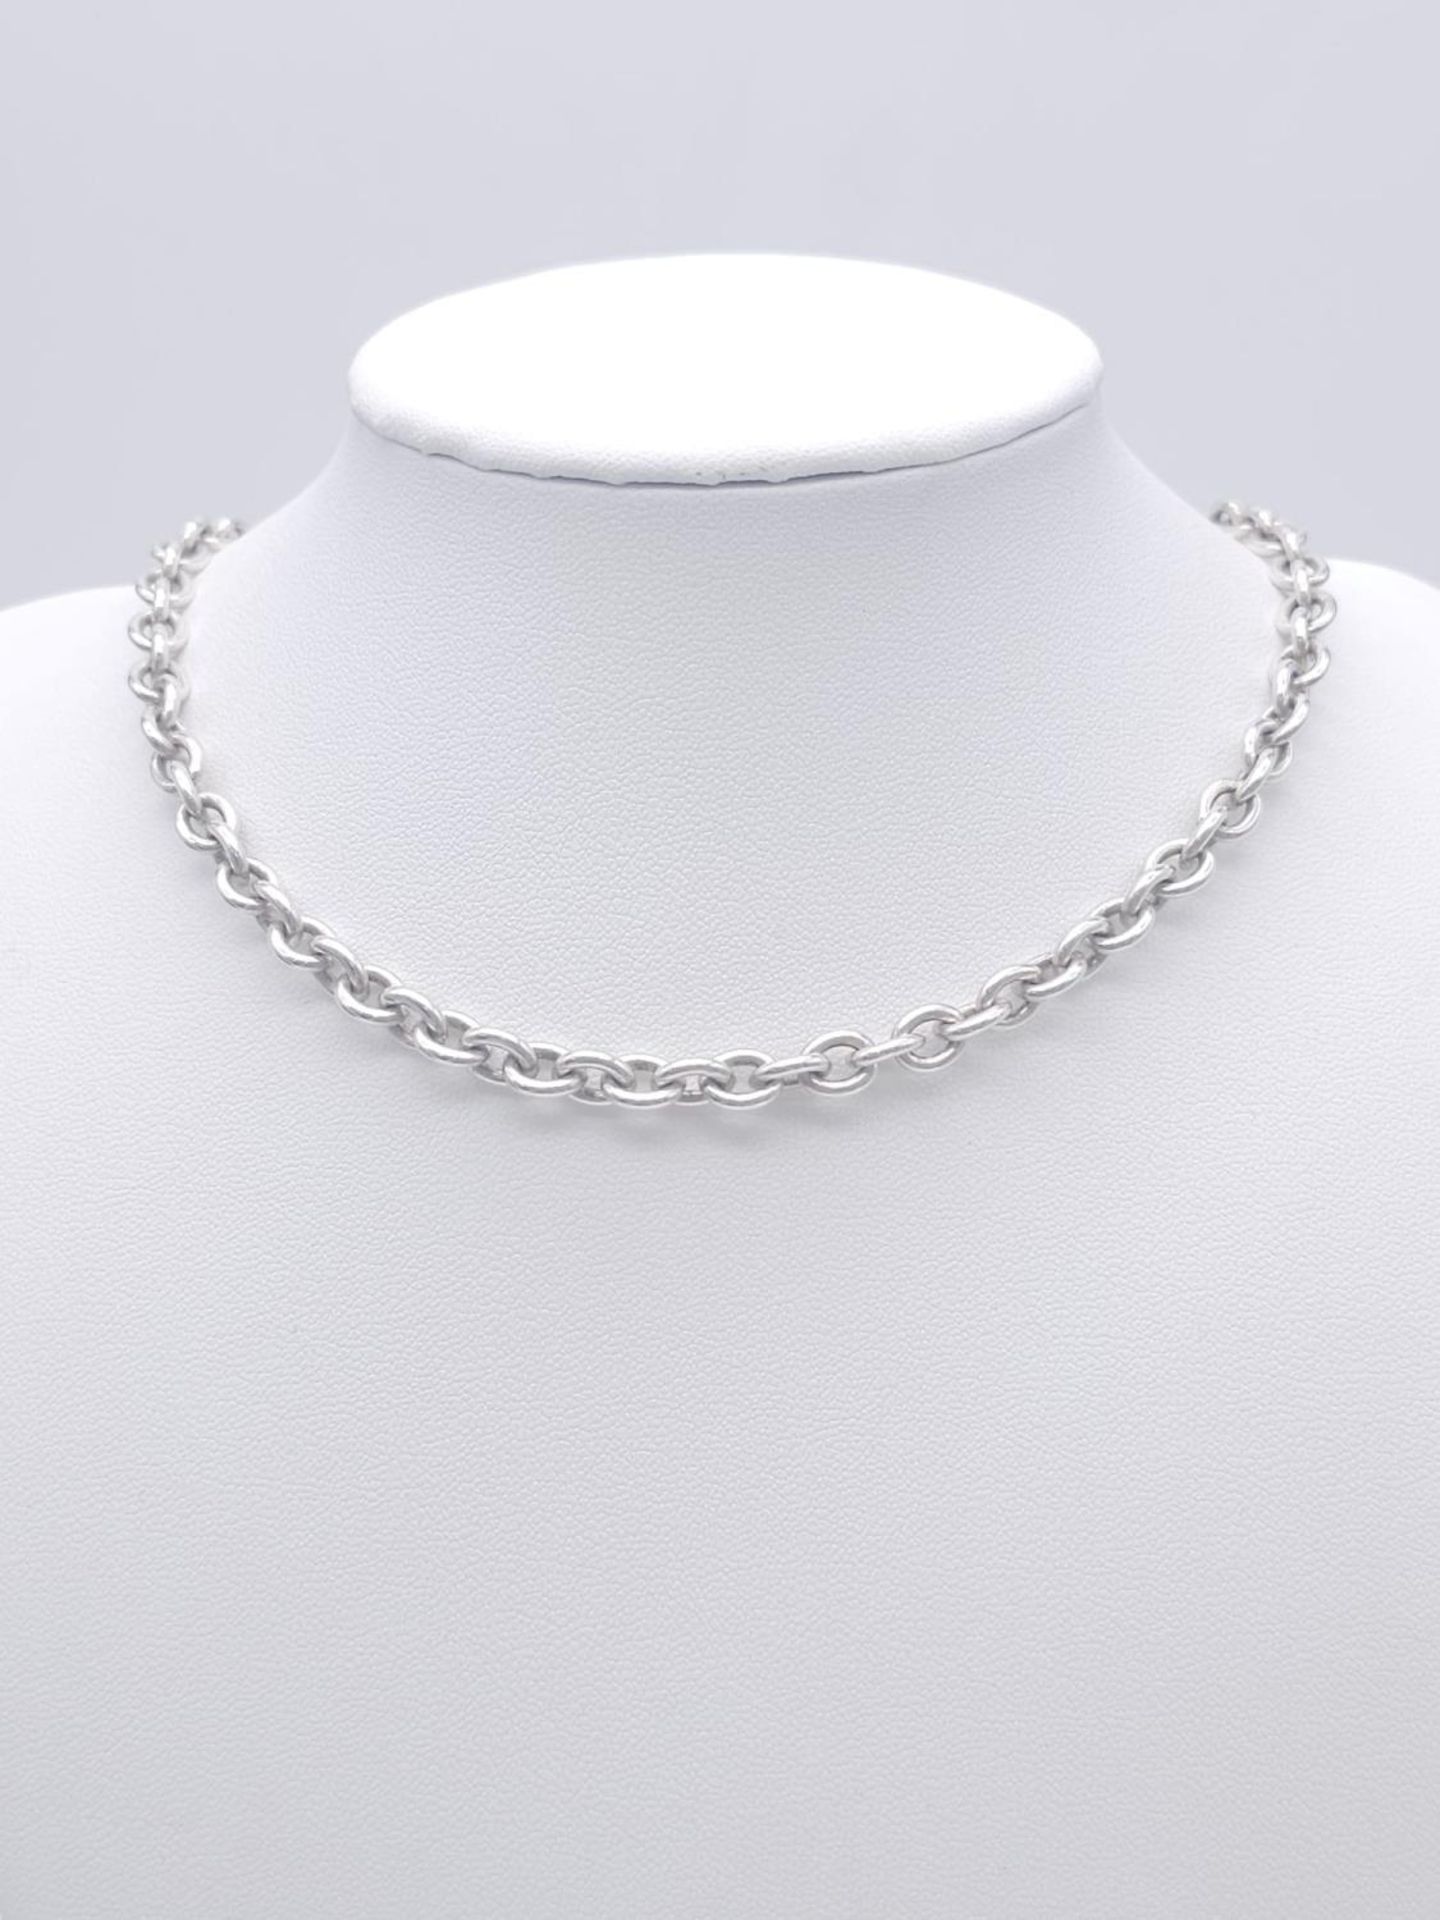 A Sterling silver T-bar heart necklace with matching 20cm bracelet. 54.3g total weight. - Bild 5 aus 8